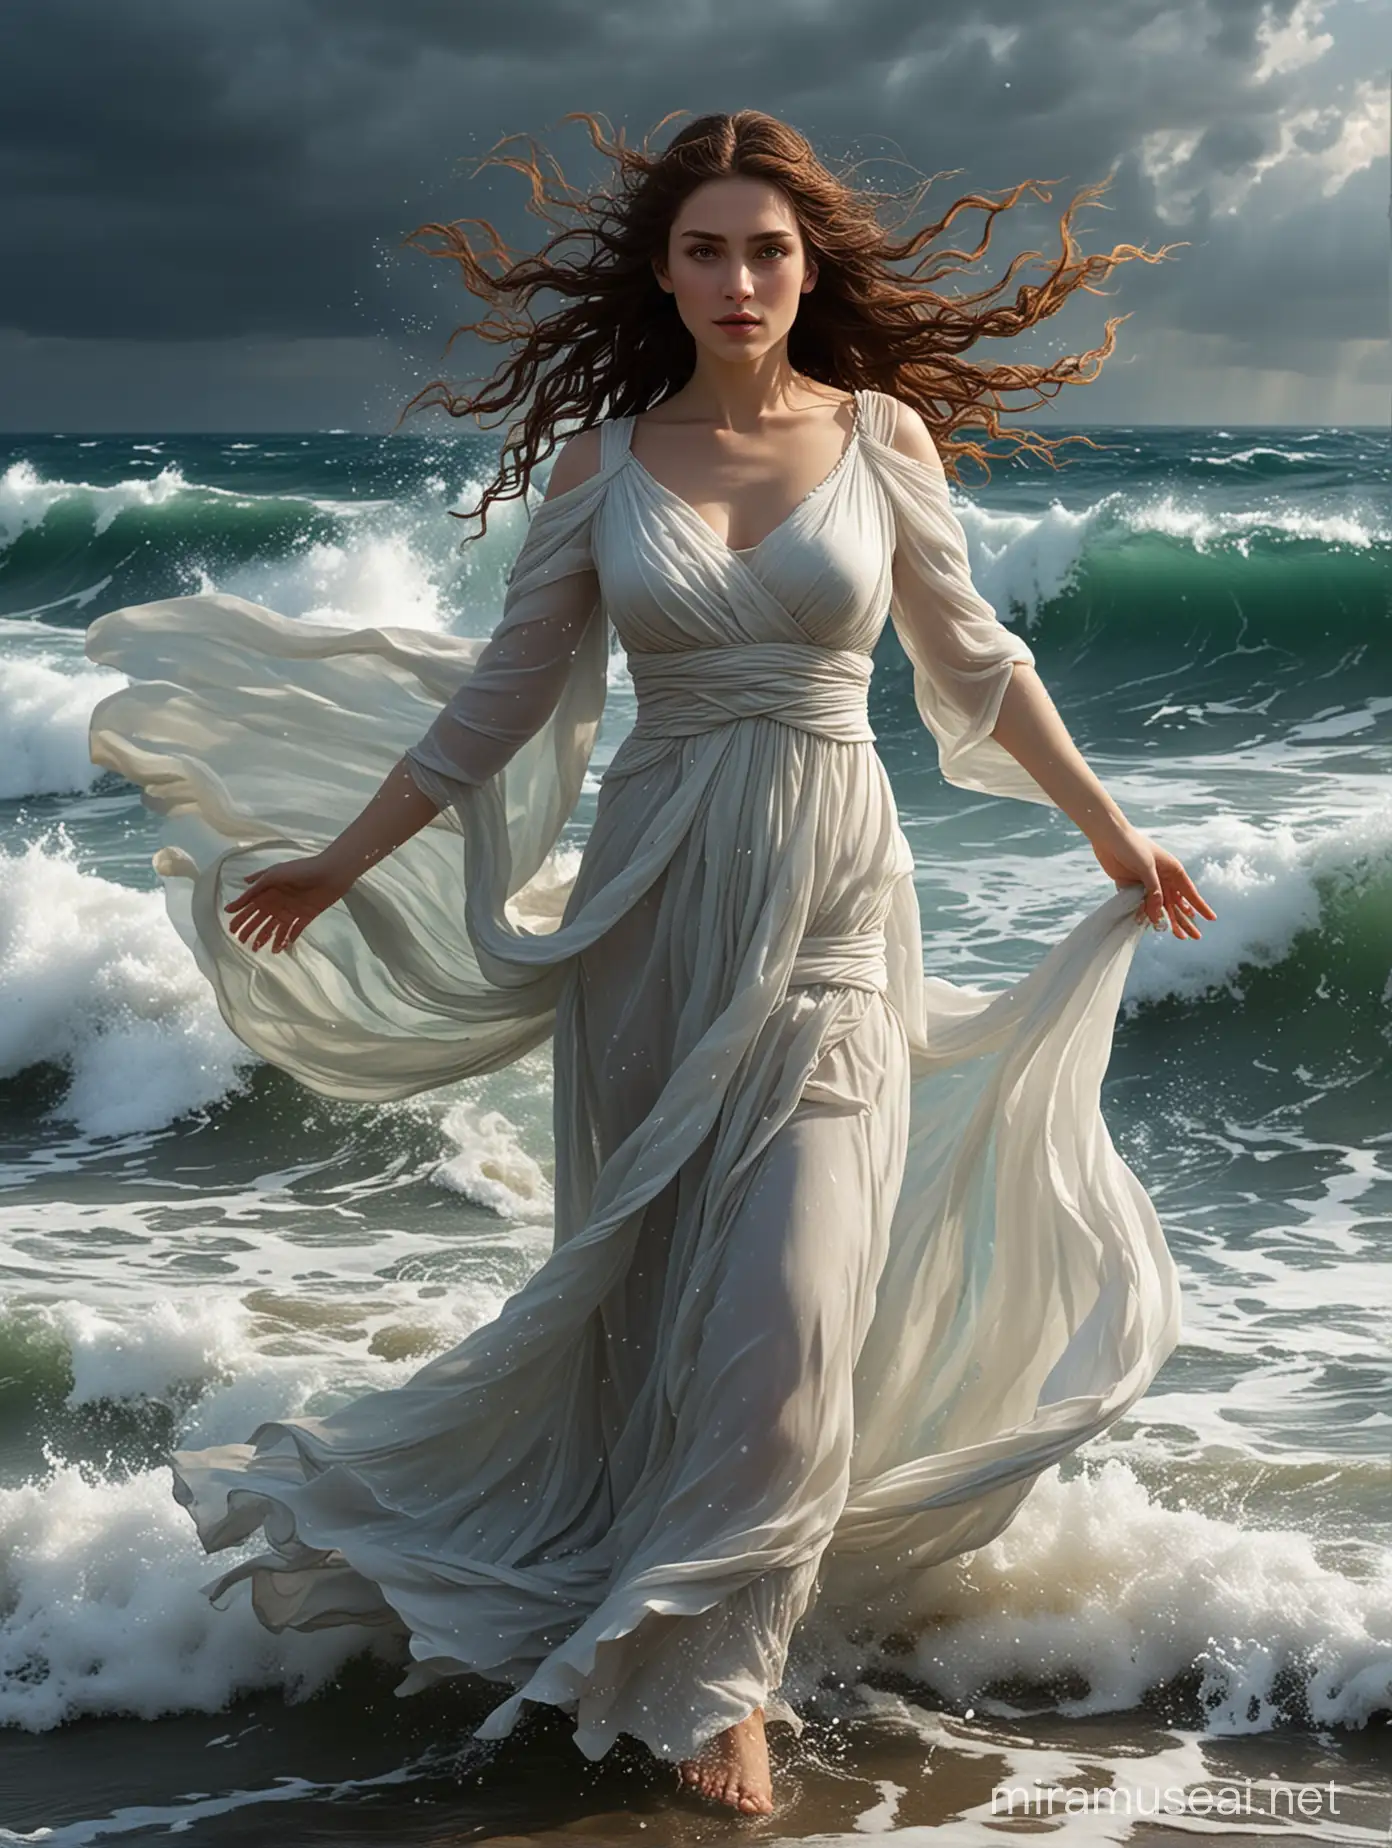 A masterpieced of Kimiya Hosseini as Leucothea, Greek goddess of the sea. She emerges of the sea, and her Greek dress flows ethereally in the wind until it mixes with the water until it disappears. She has has blue eyes.
The storm tossed sea. 